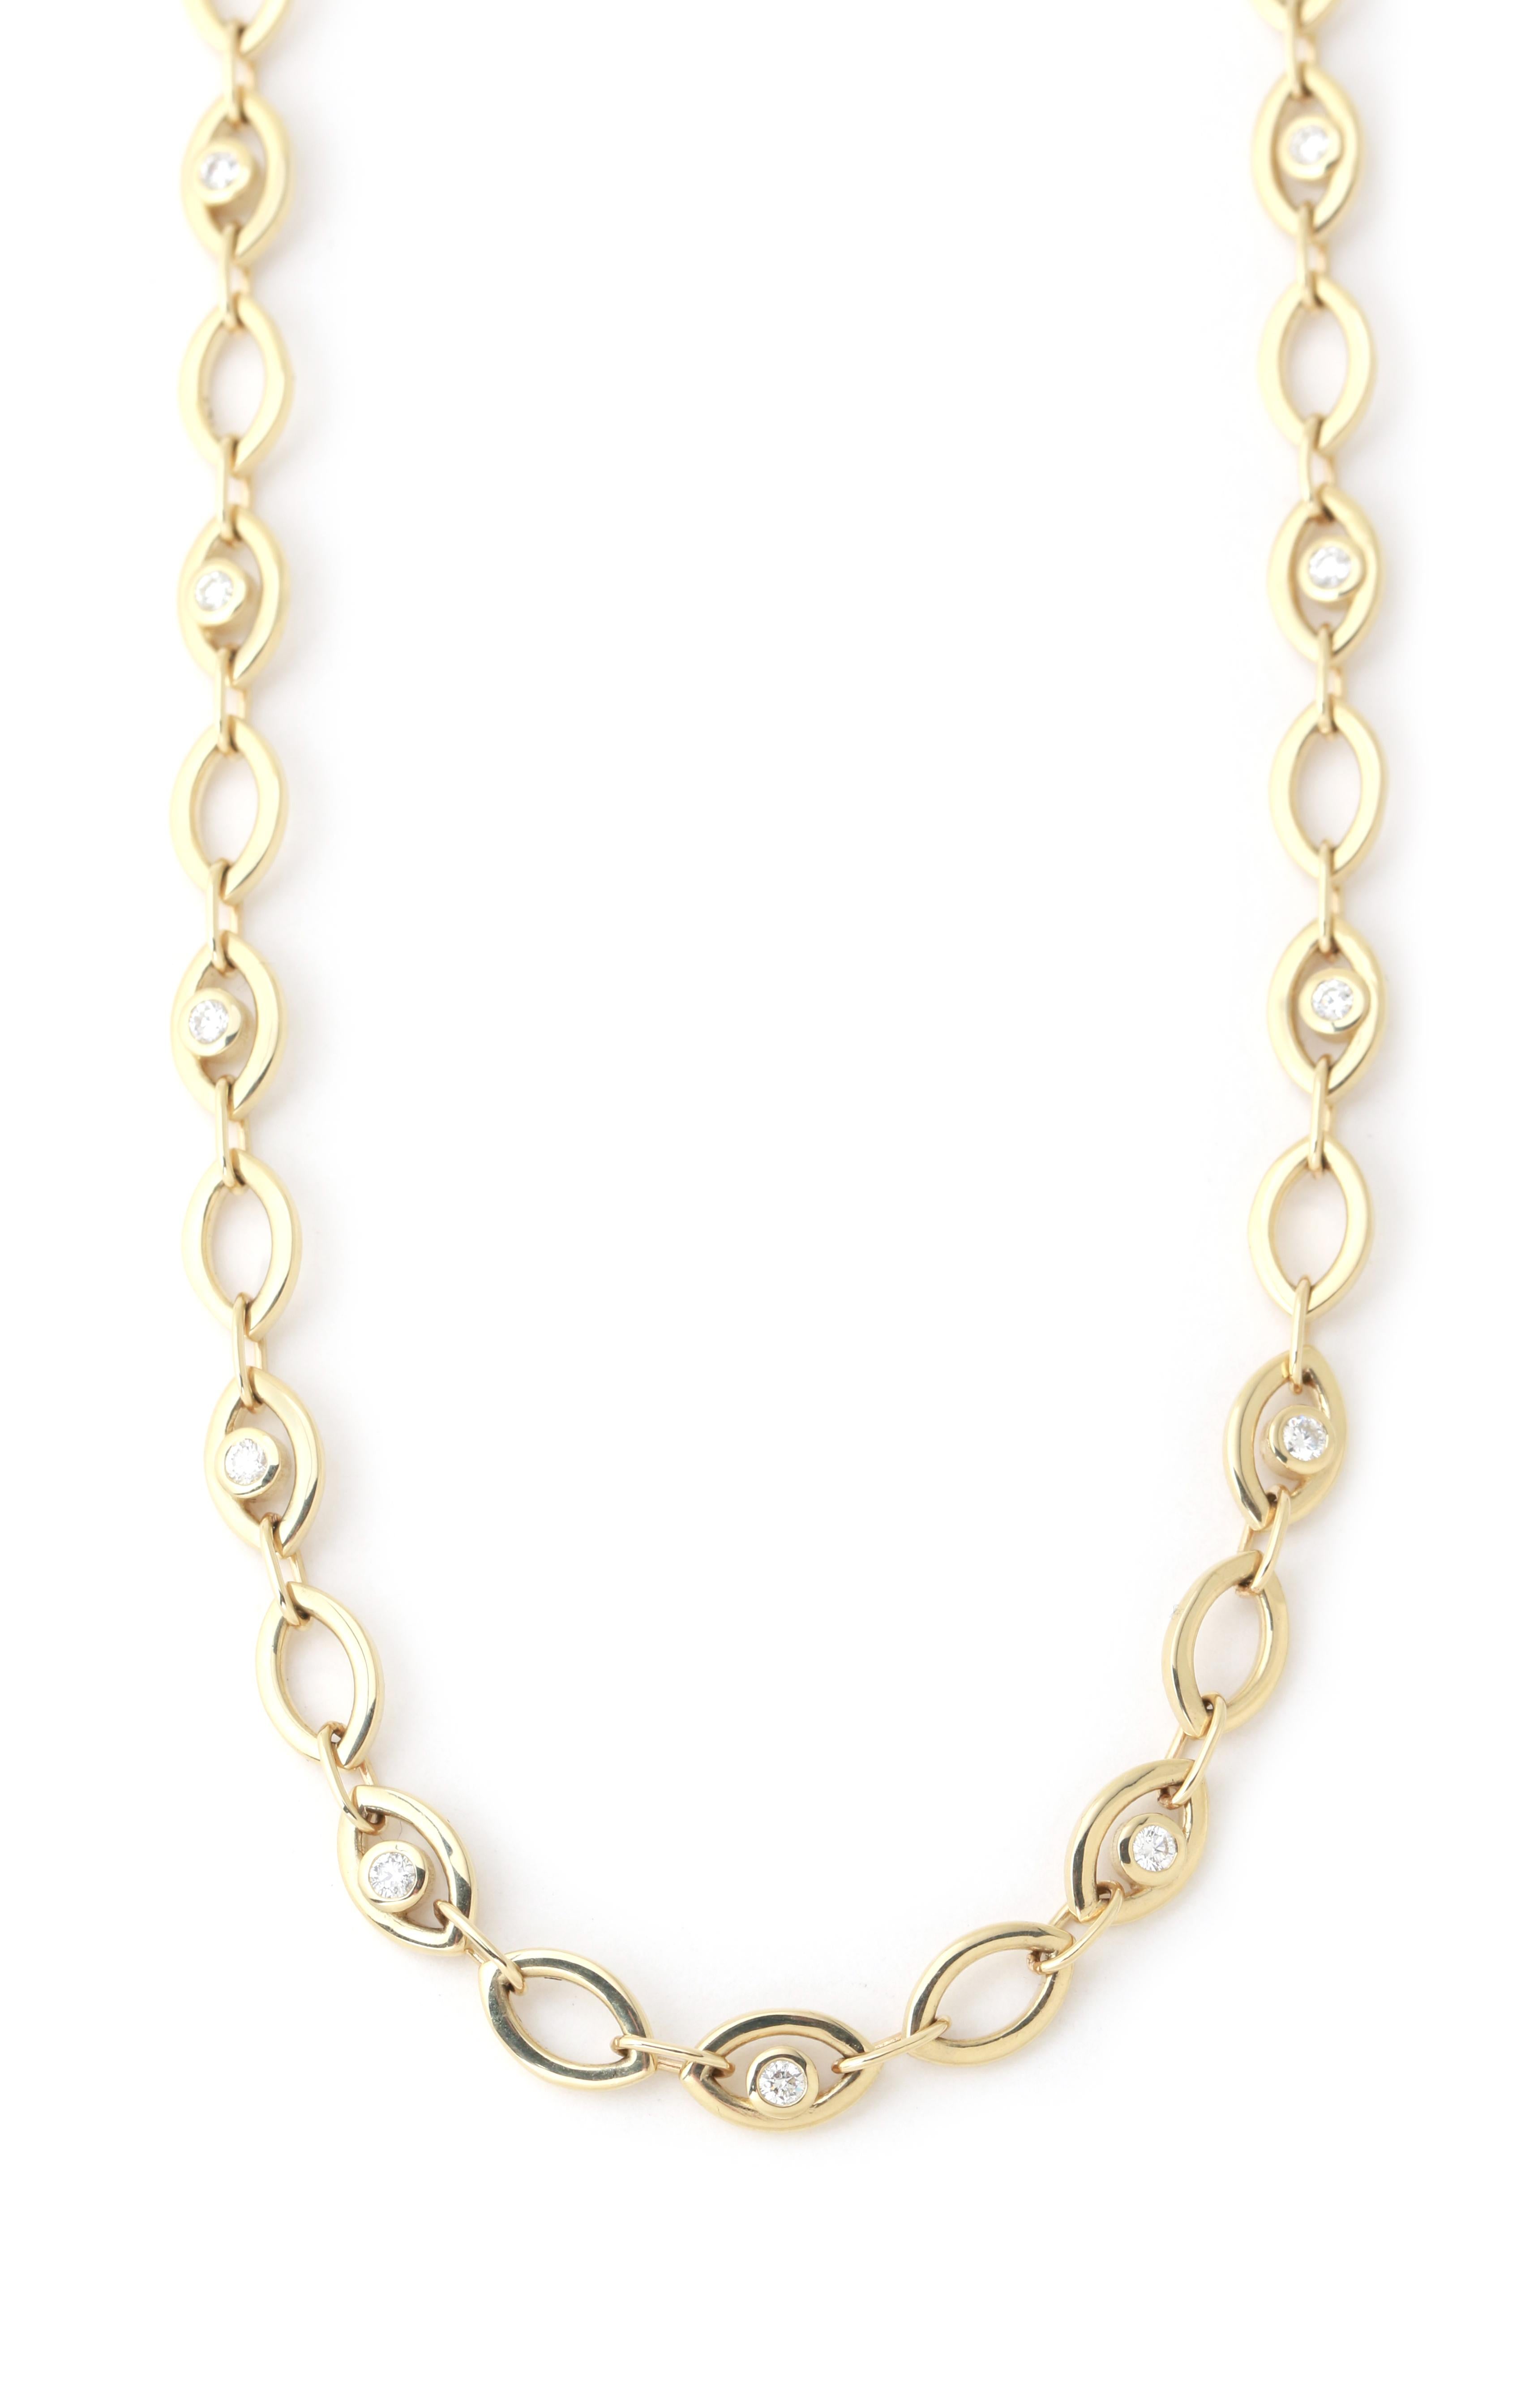 Repeating links of white diamond eye pieces connect to form and chain necklace that extends a total length of 16 inches.

14k yellow gold
white diamonds, 0.77 carats total